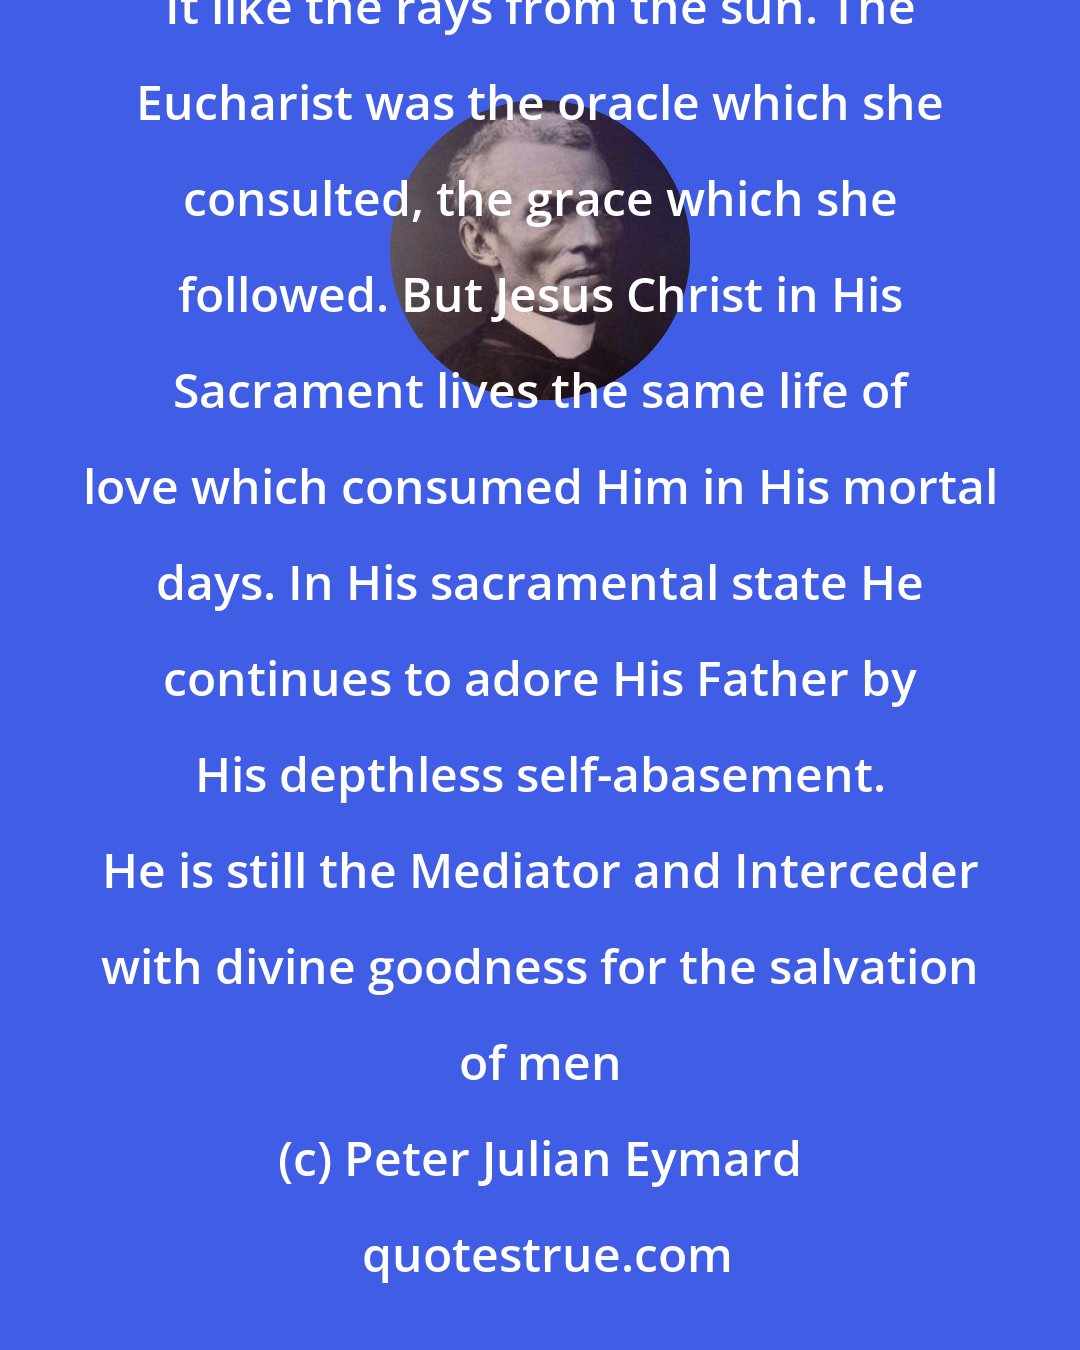 Peter Julian Eymard: Mary lived in the divine Eucharist, the center of her love. All her thoughts, words, and actions sprang from It like the rays from the sun. The Eucharist was the oracle which she consulted, the grace which she followed. But Jesus Christ in His Sacrament lives the same life of love which consumed Him in His mortal days. In His sacramental state He continues to adore His Father by His depthless self-abasement. He is still the Mediator and Interceder with divine goodness for the salvation of men